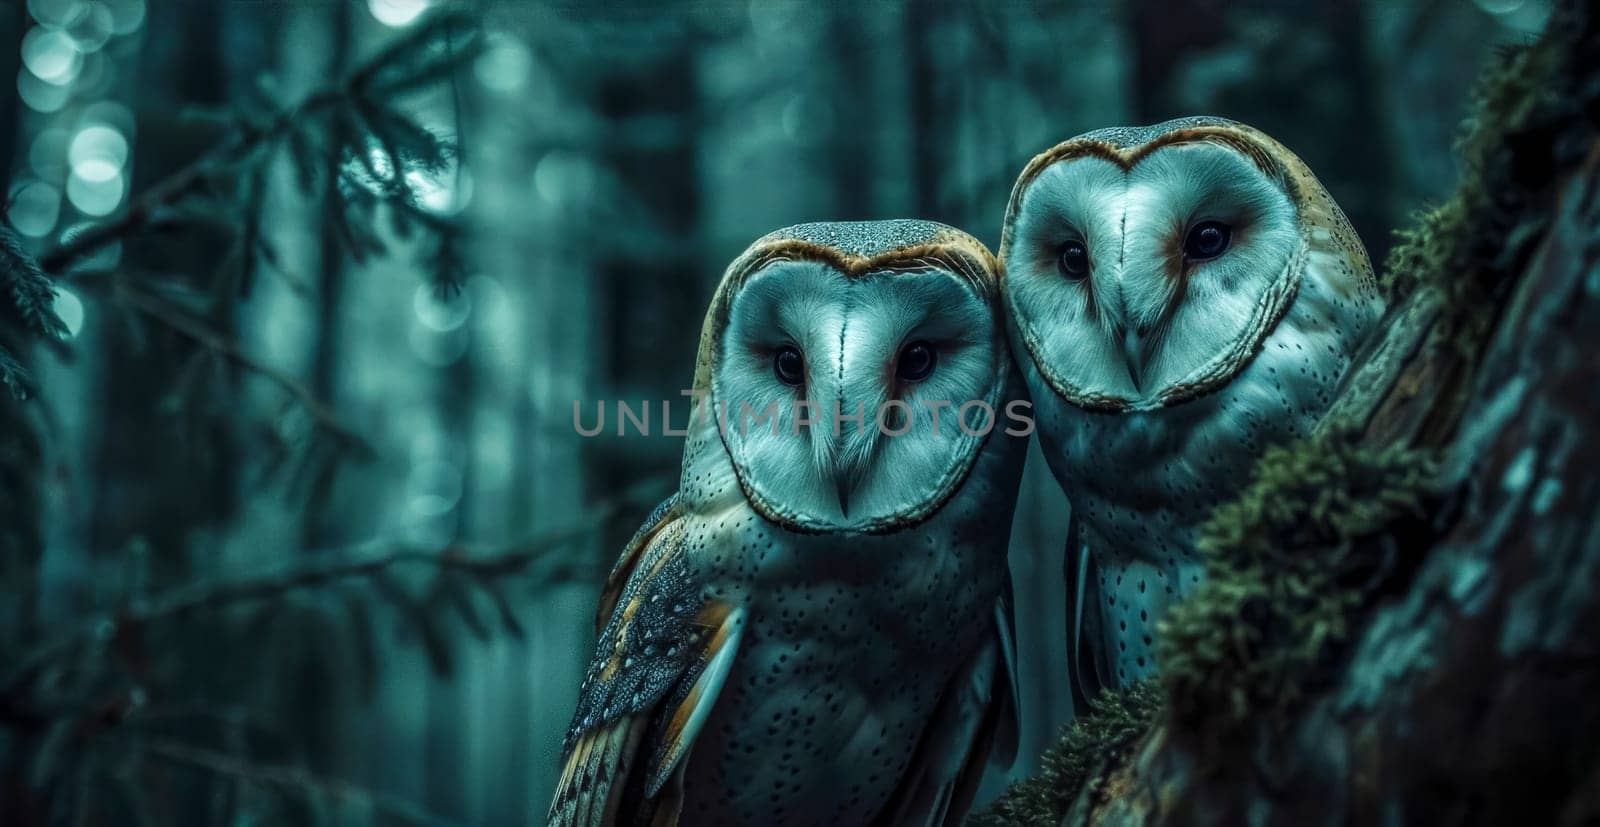 Pair of serene owls resting on a branch amidst a moody, twilight forest